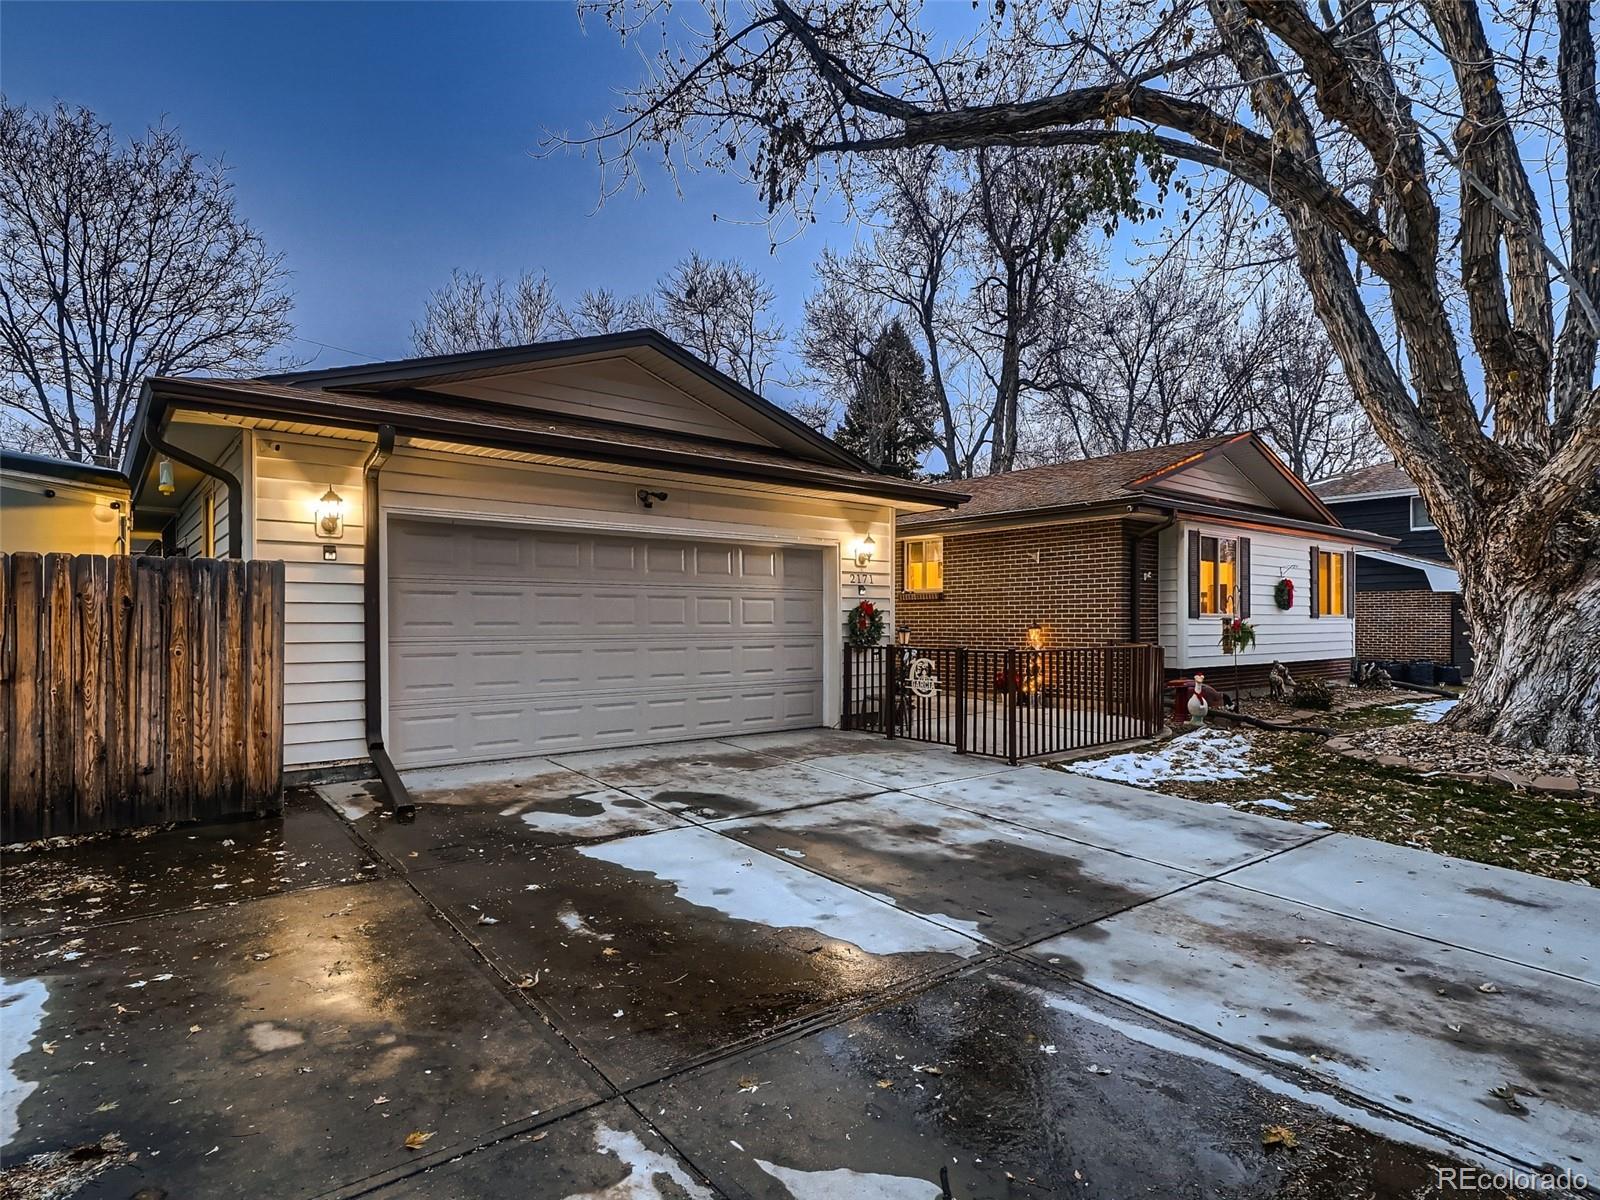 Report Image for 2171 S Allison Court,Lakewood, Colorado